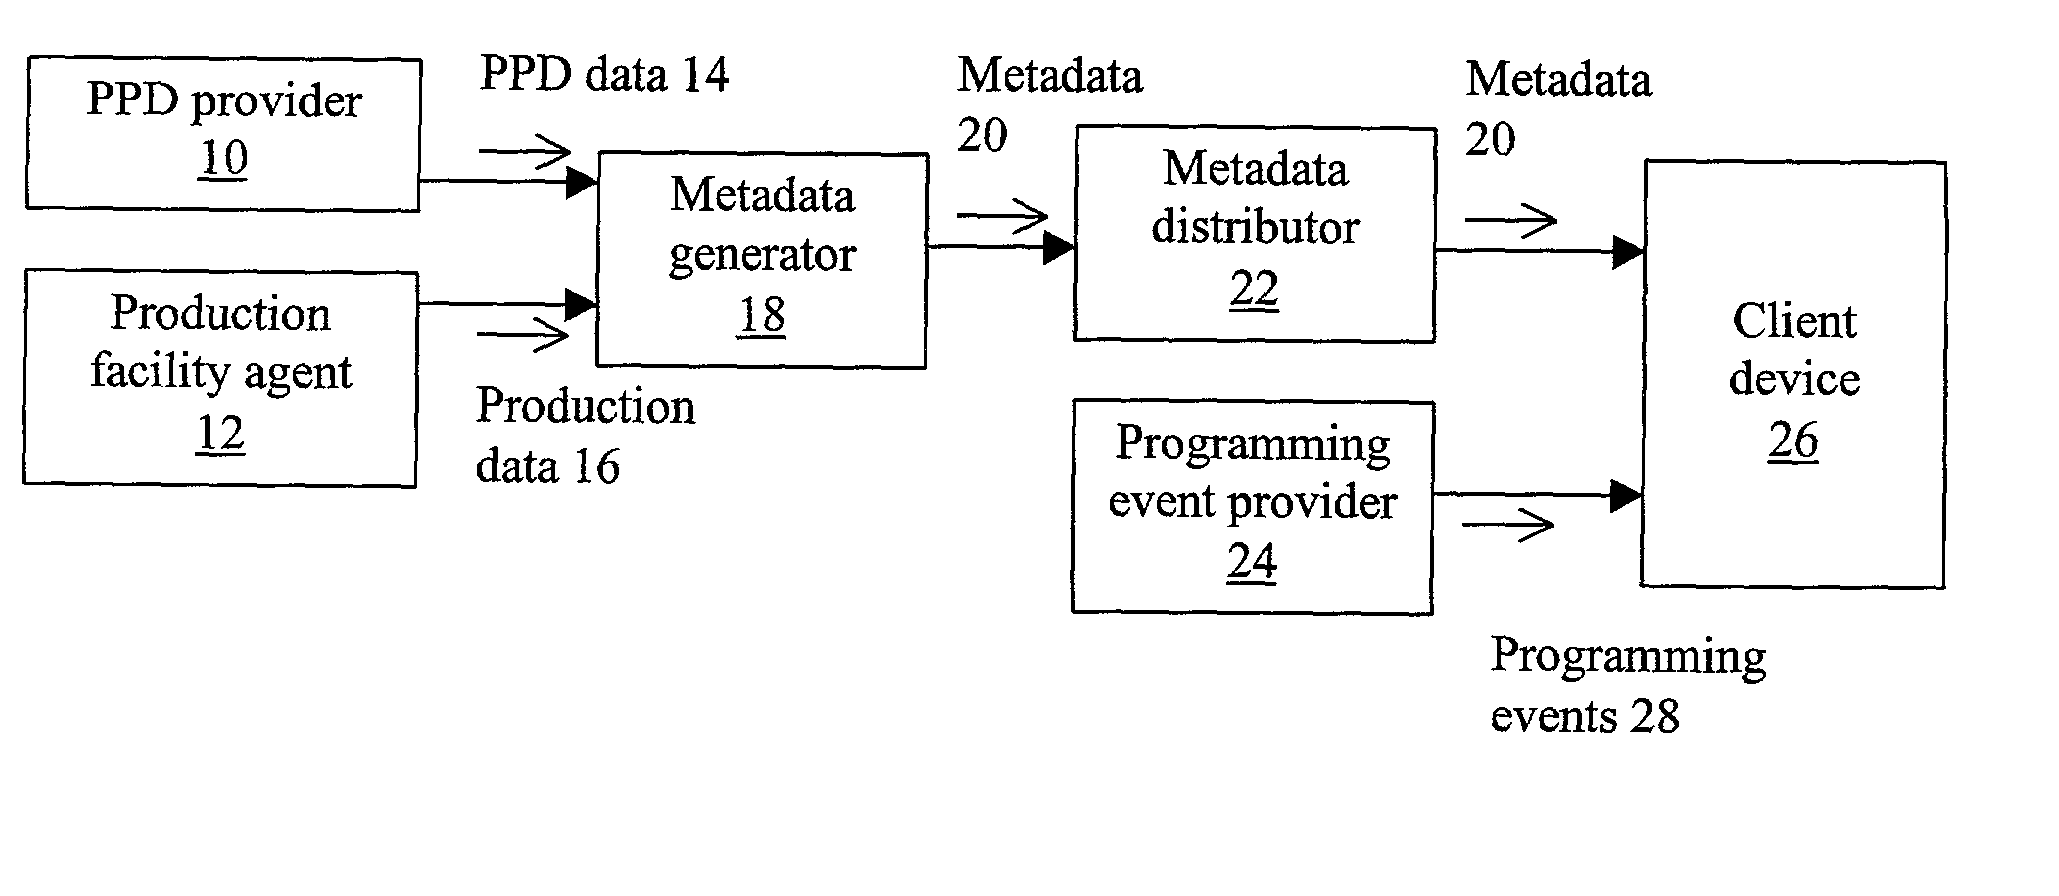 Interactive system and method for generating metadata for programming events